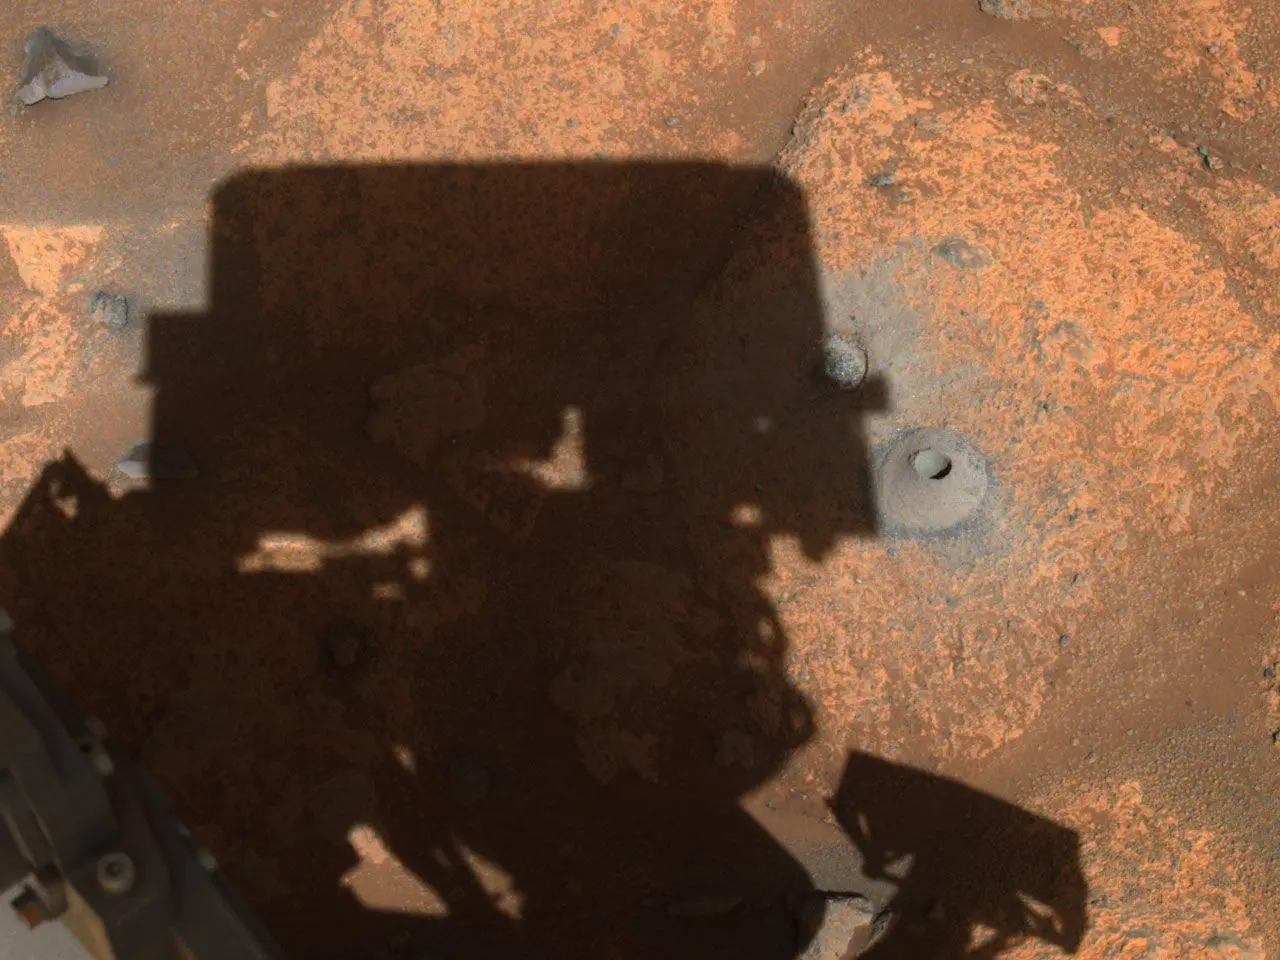 Perseverance's Navigation Camera Image of First Borehole: The drill hole from Perseverance’s first sample-collection attempt can be seen, along with the shadow of the rover, in this image taken by one of the rover’s navigation cameras. Credits: NASA/JPL-Caltech.